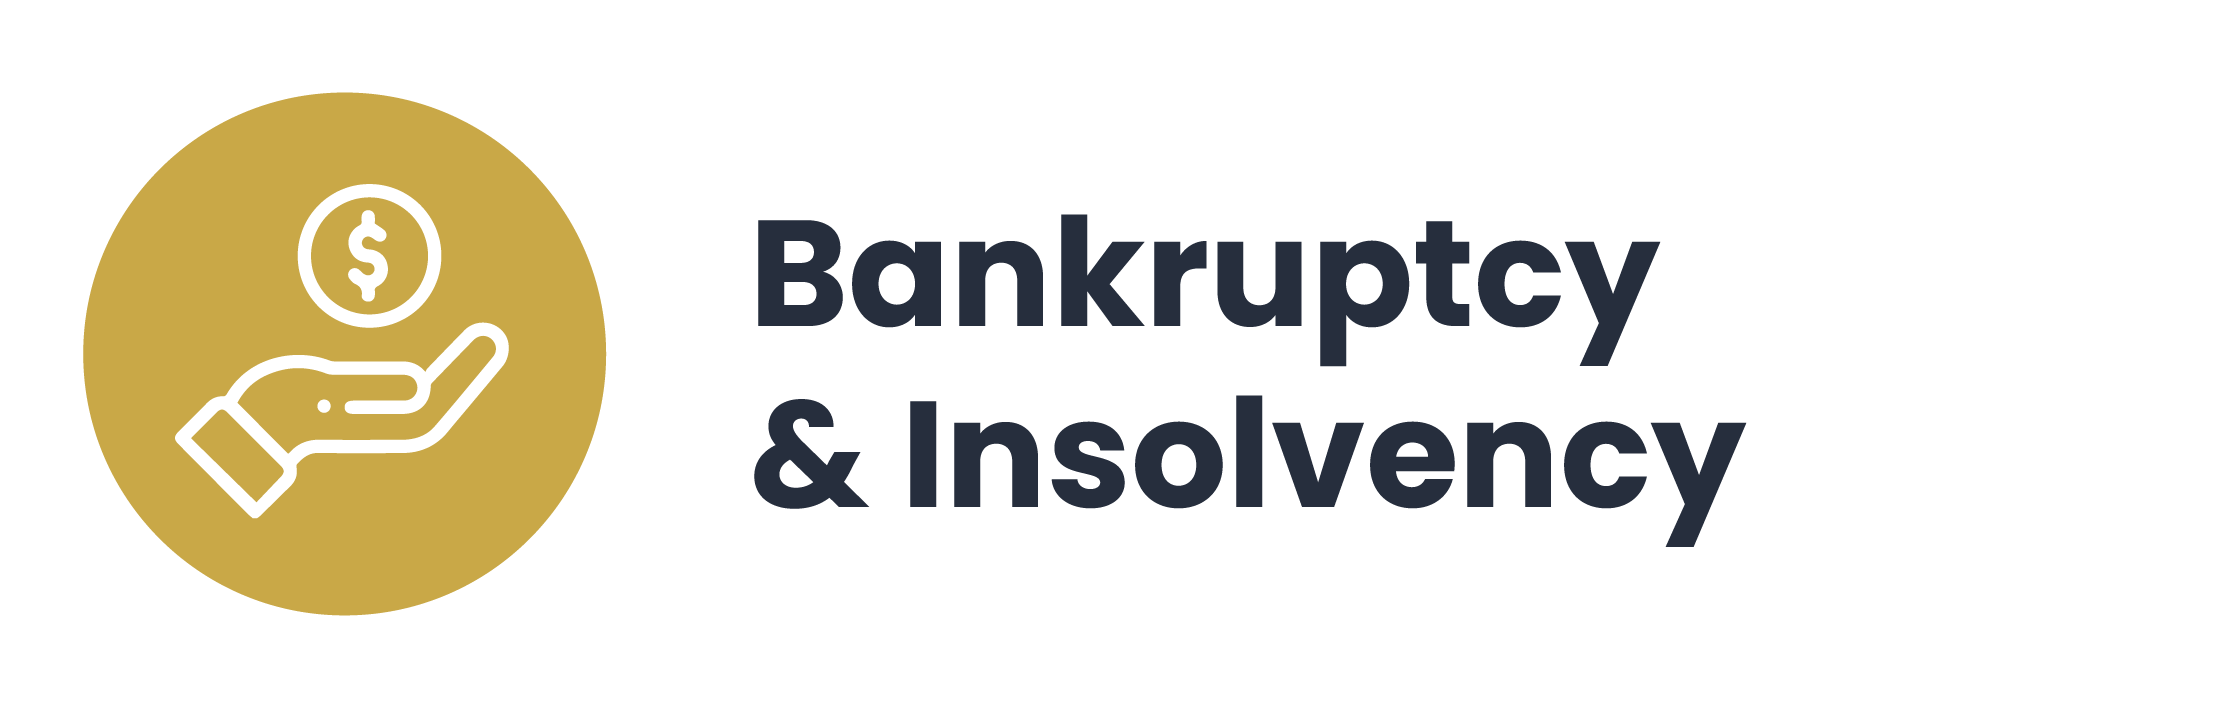 BR_Solicitors_Buderim_Icons_Bankruptcy_and_insolvency.png